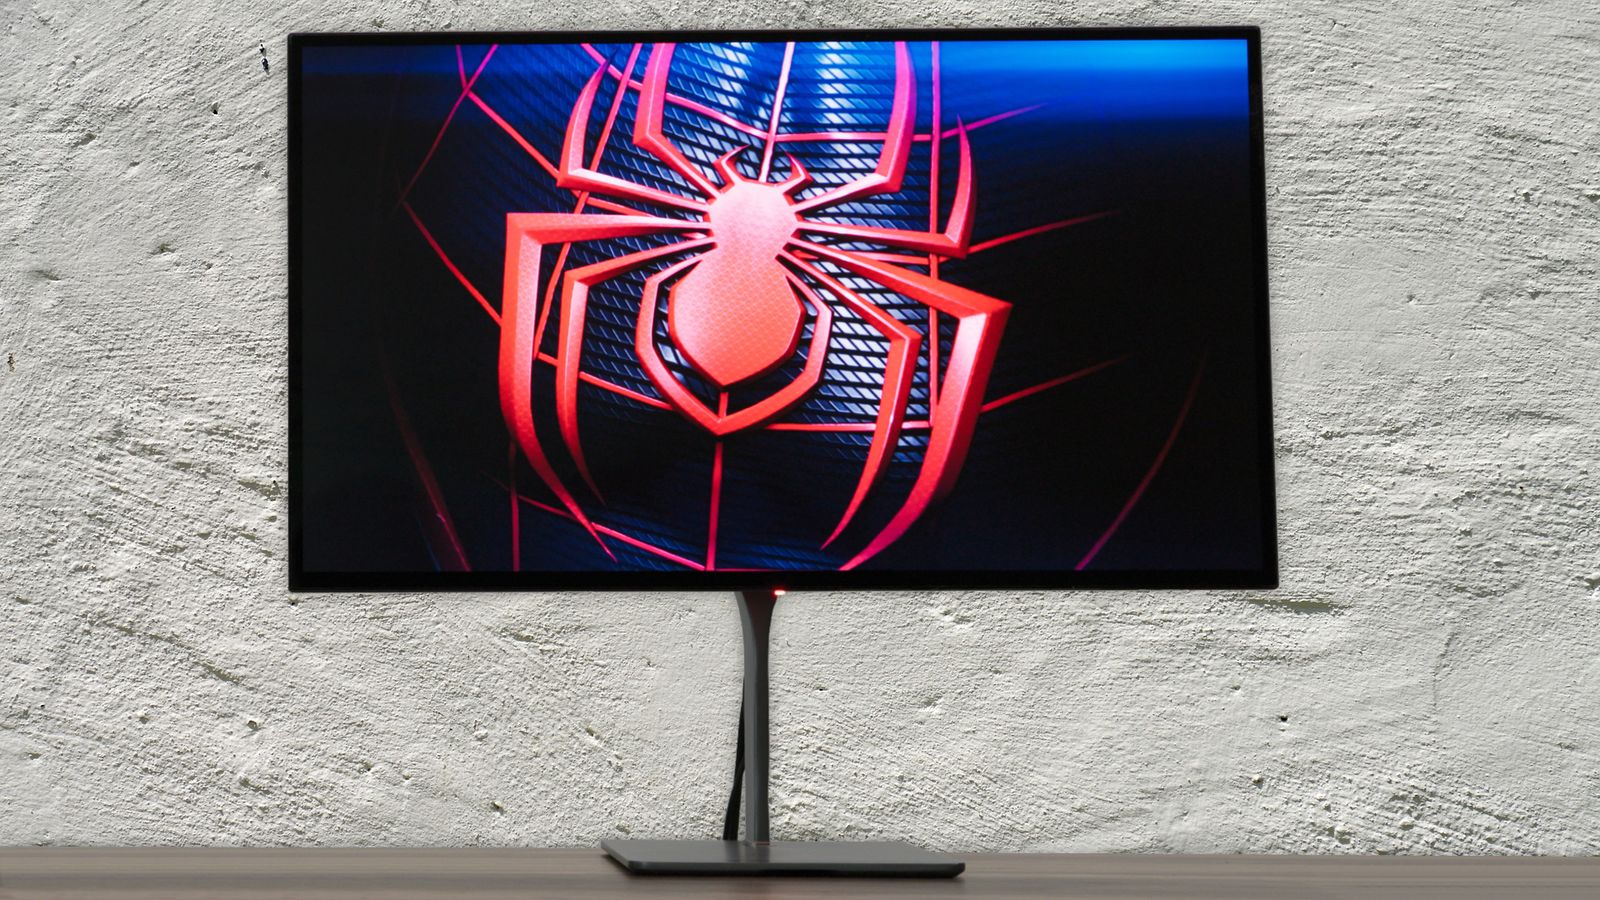 A Dough Spectrum Black gaming monitor with Miles Morales' Spider-Man logo on the screen